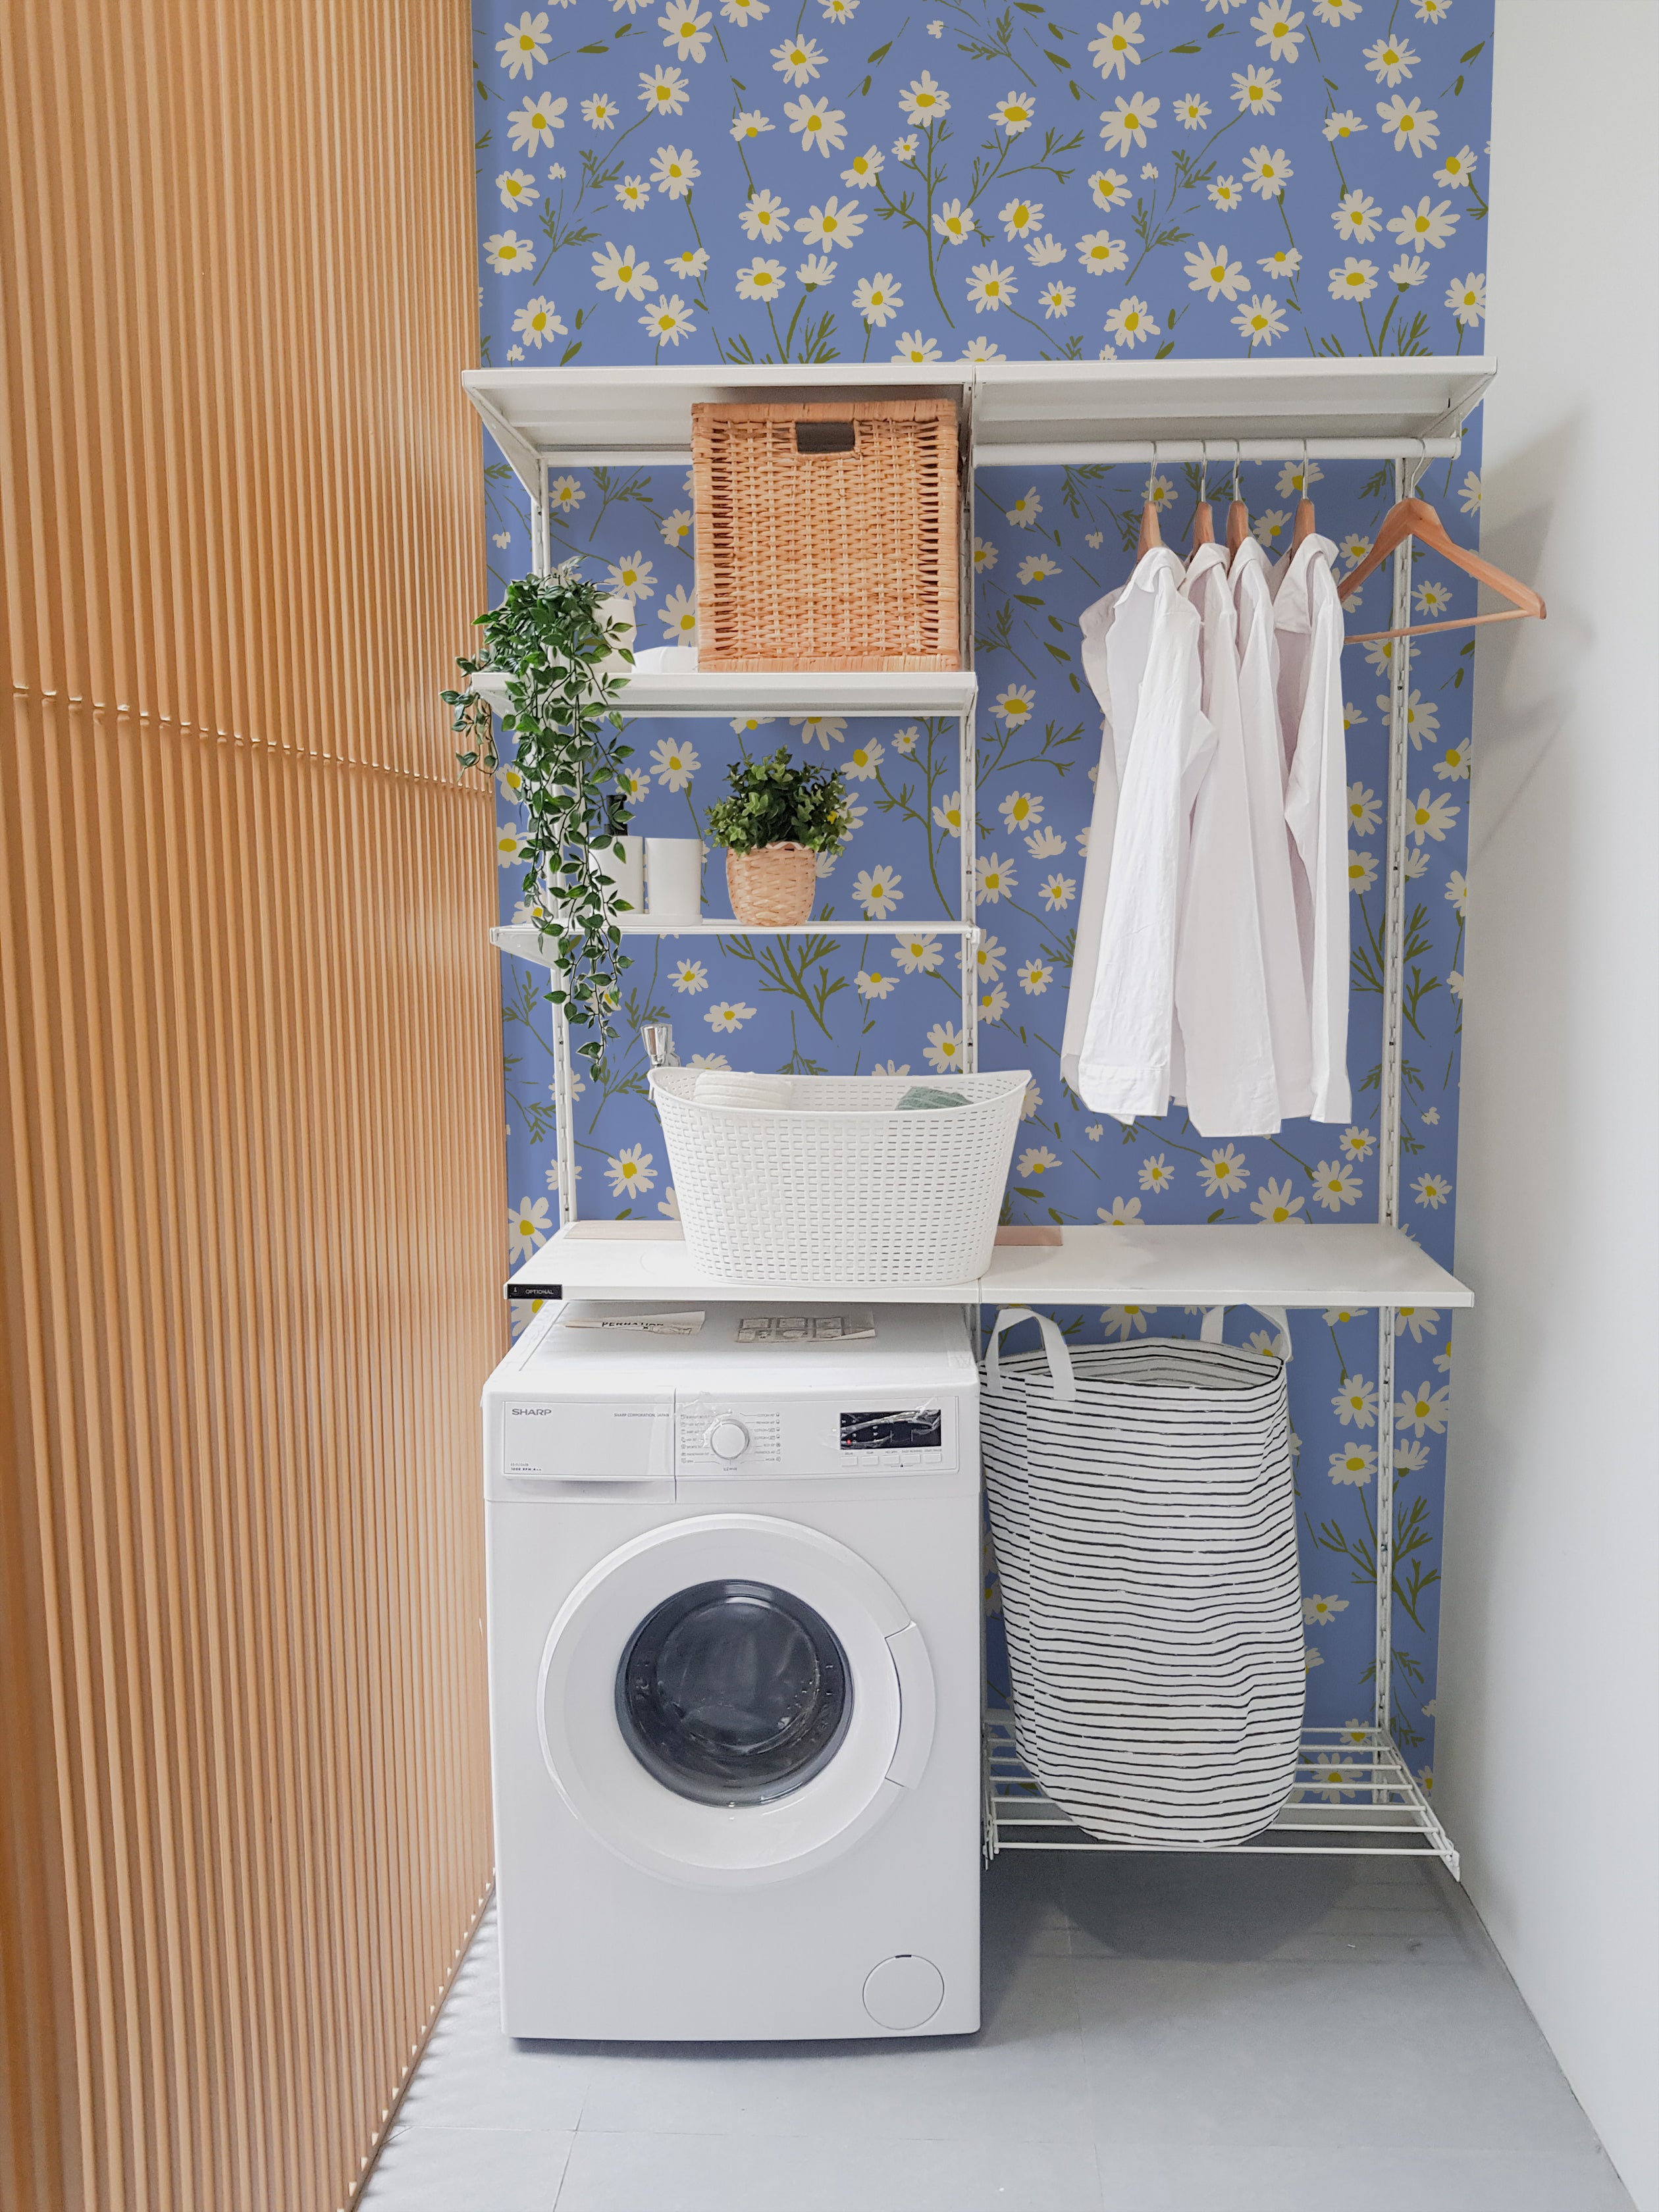 "Bright and cheerful laundry room with light blue walls covered in a floral wallpaper featuring white and yellow daisies, a white washing machine, white shelving units with various household items, and wicker baskets.